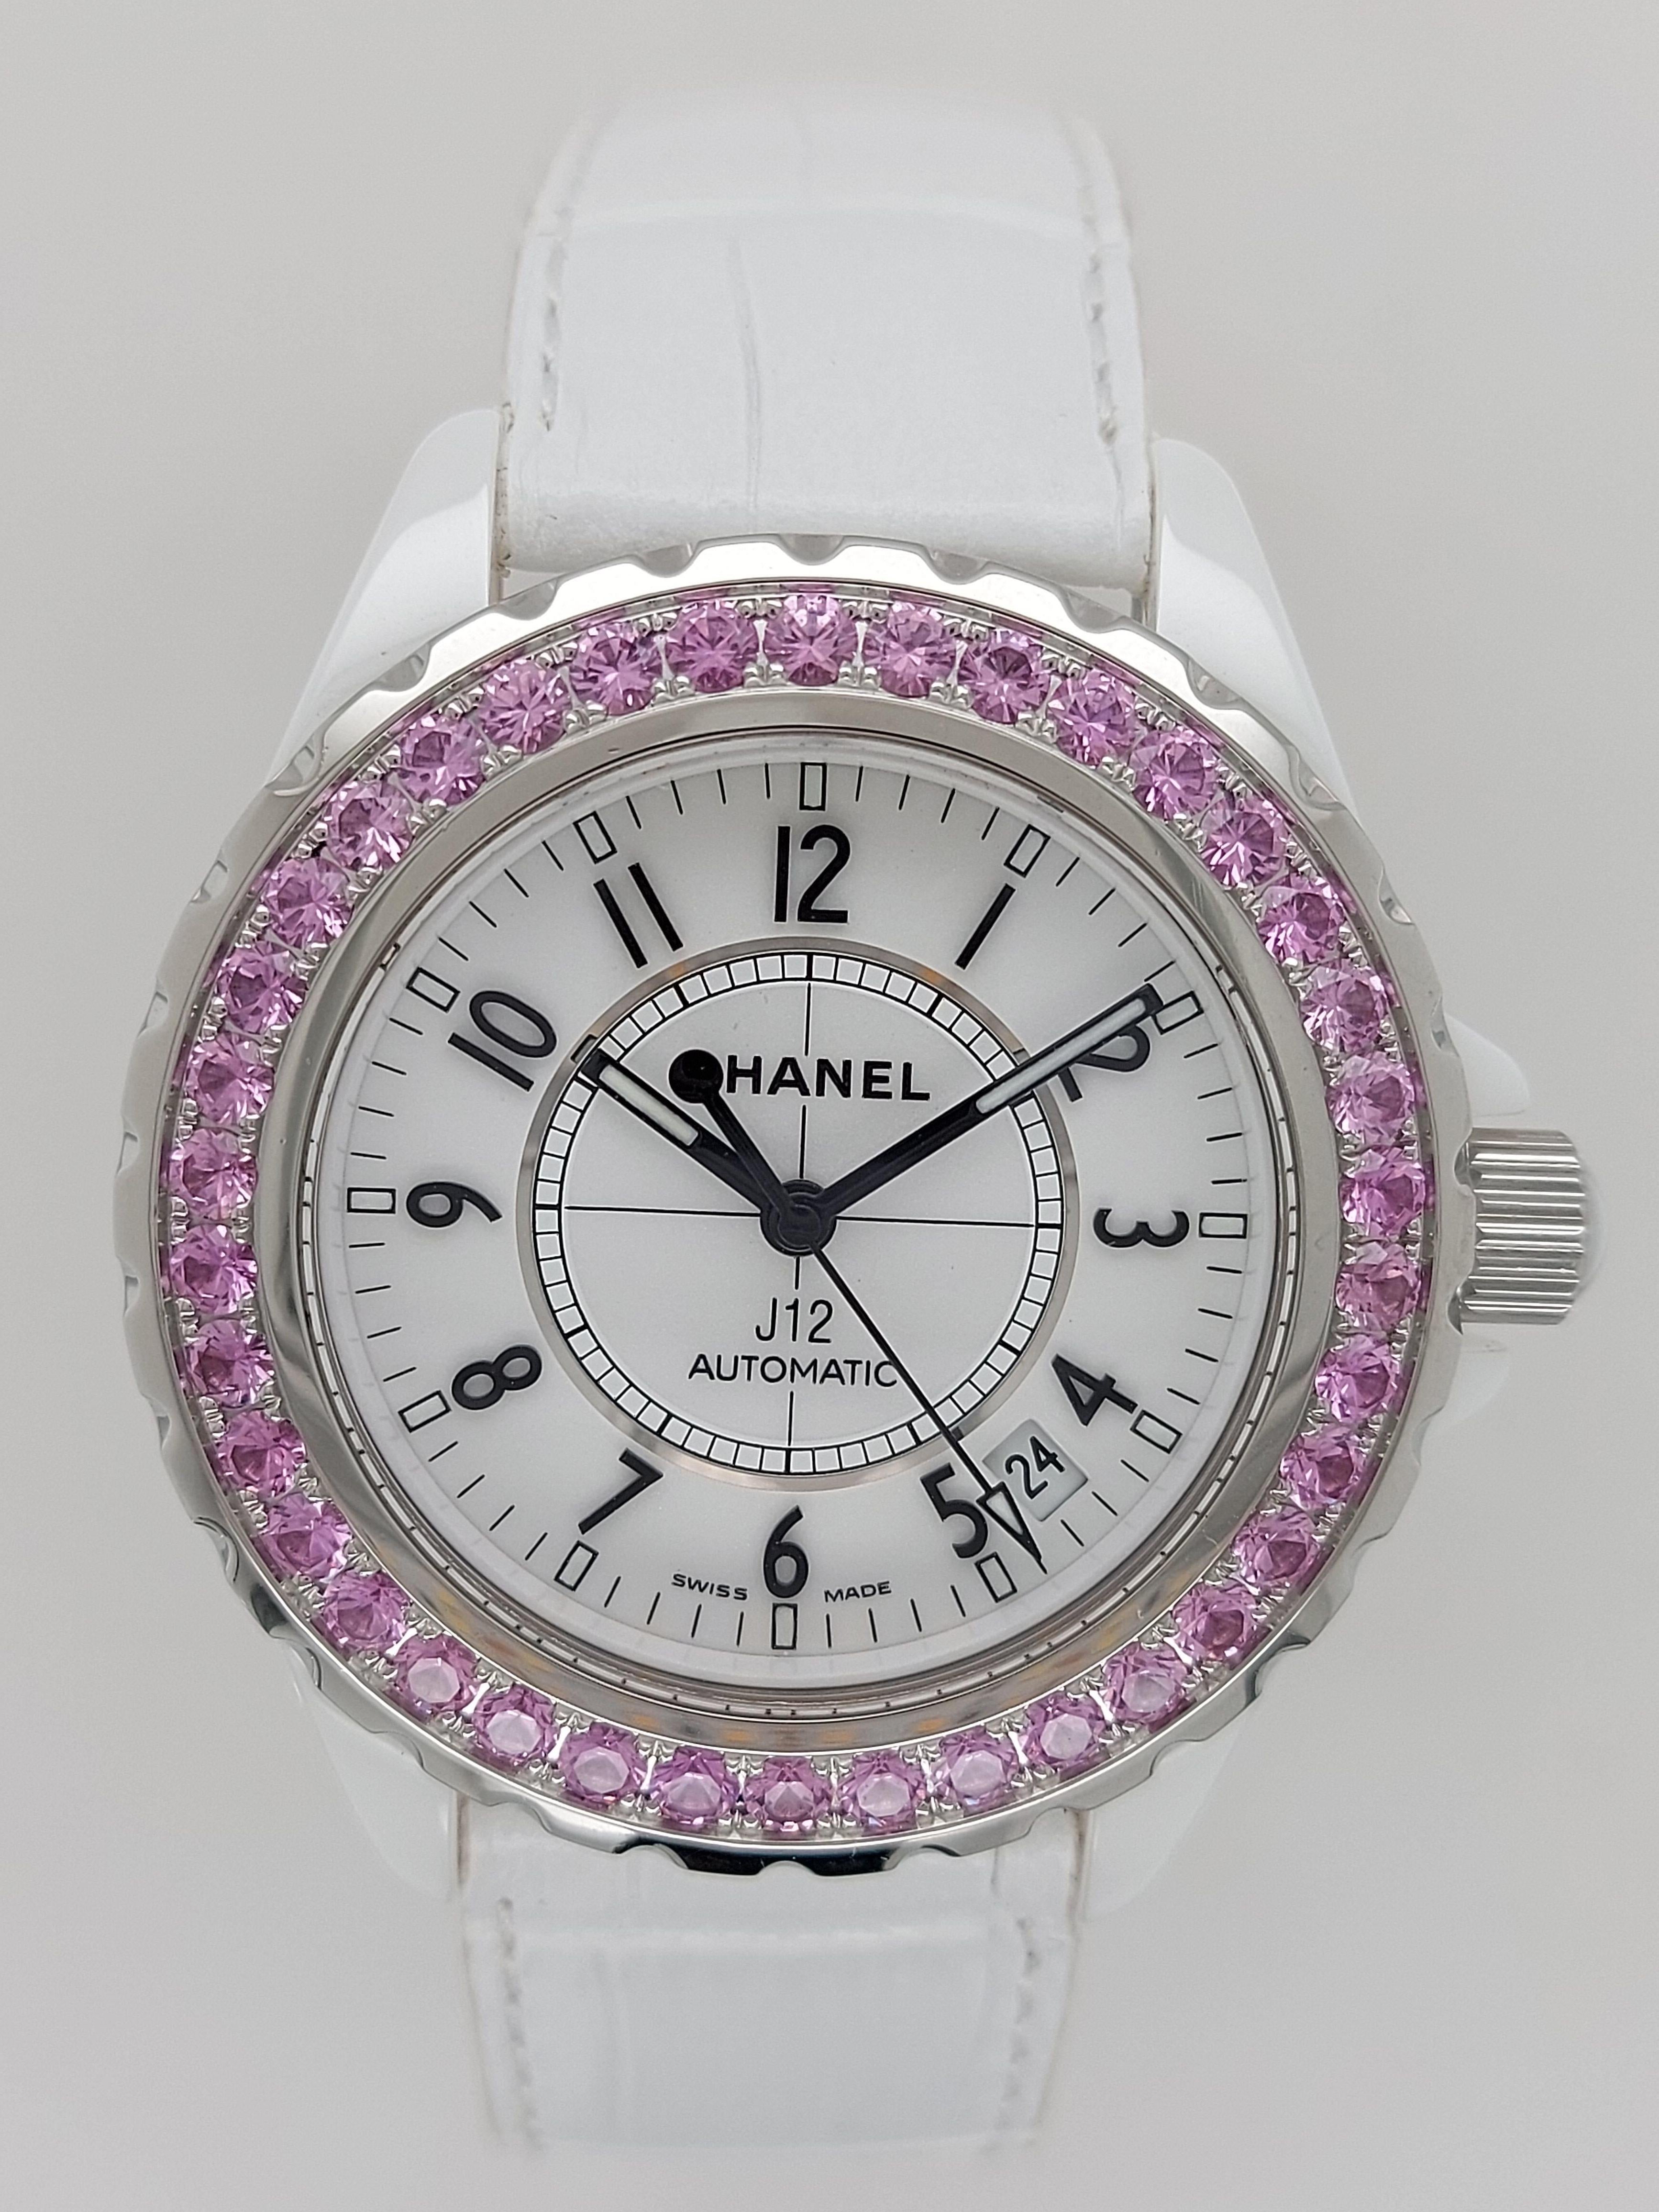 Artisan Chanel J12, Automatic, Ceramic Case, with Pink Sapphires